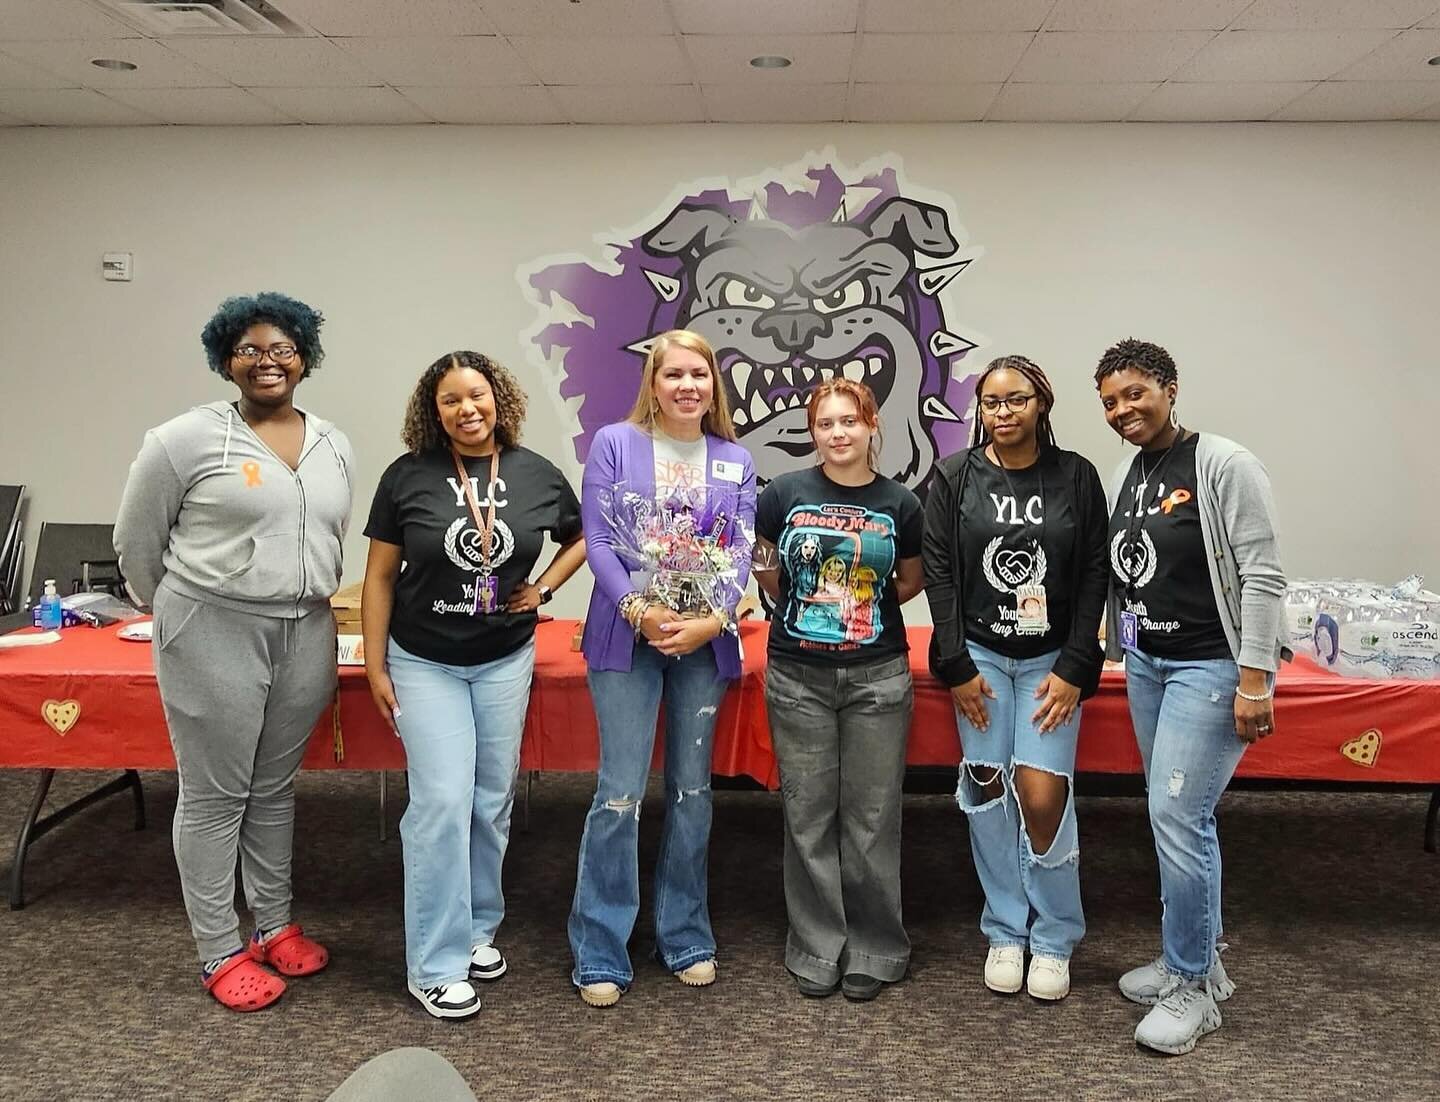 Earlier this week, SafeHaven board member Audria Maltsberger met with students at Everman High School for a lunch and learn about teen dating violence. 

We&rsquo;re so proud of our Everman student-led Youth Leading Change team for planning this even